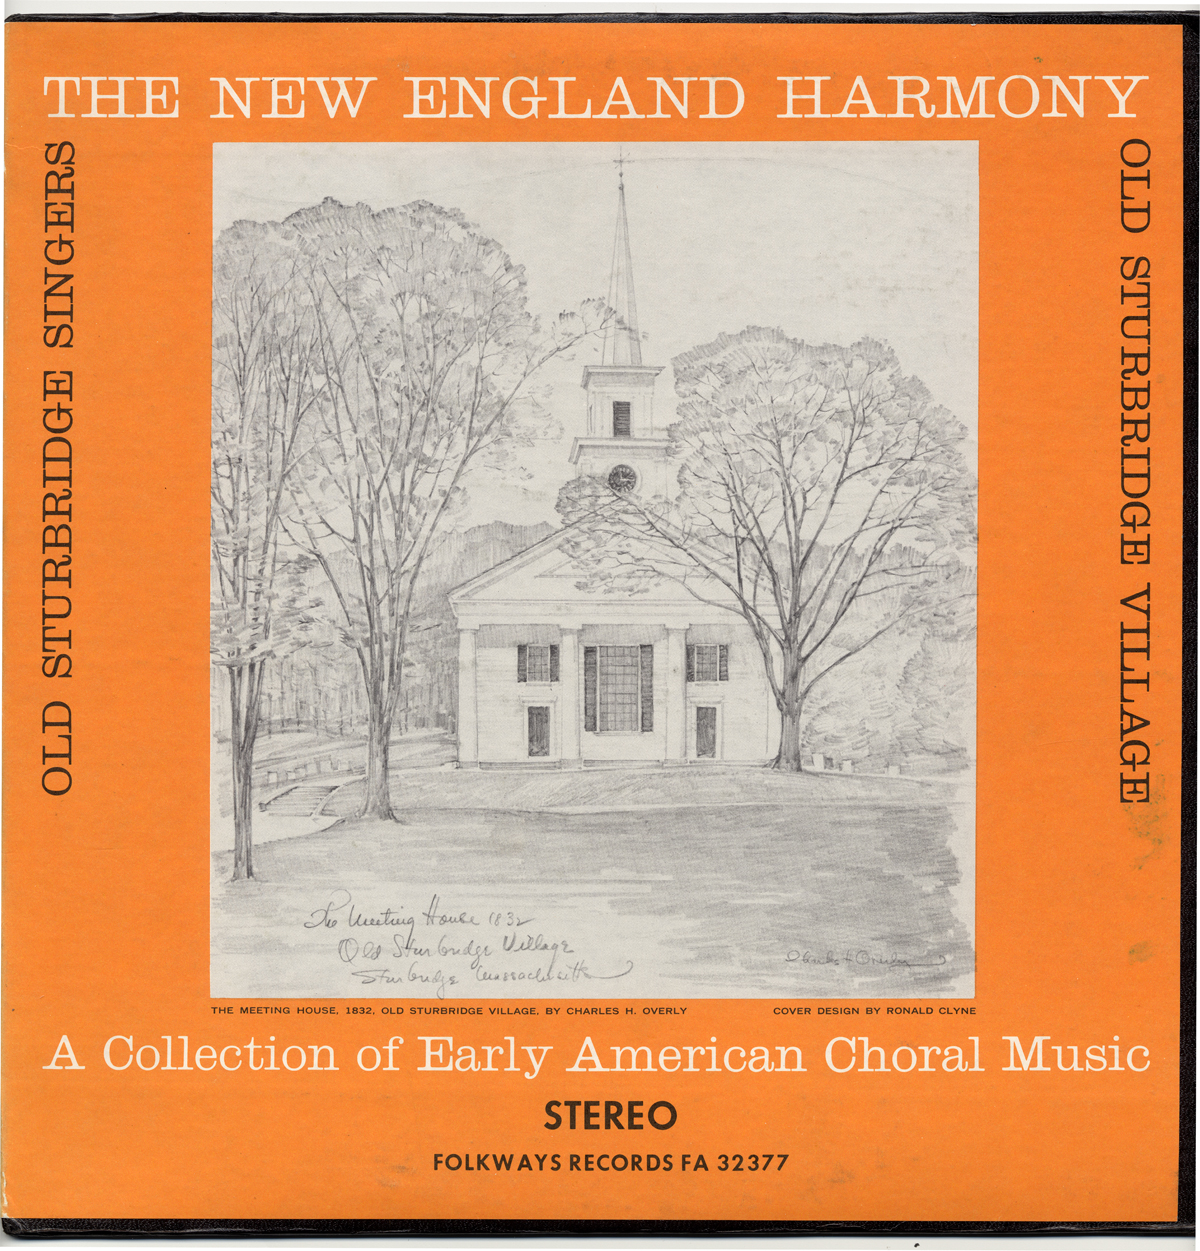 NEW ENGLAND HARMONY: EARLY AMERICAN CHORAL